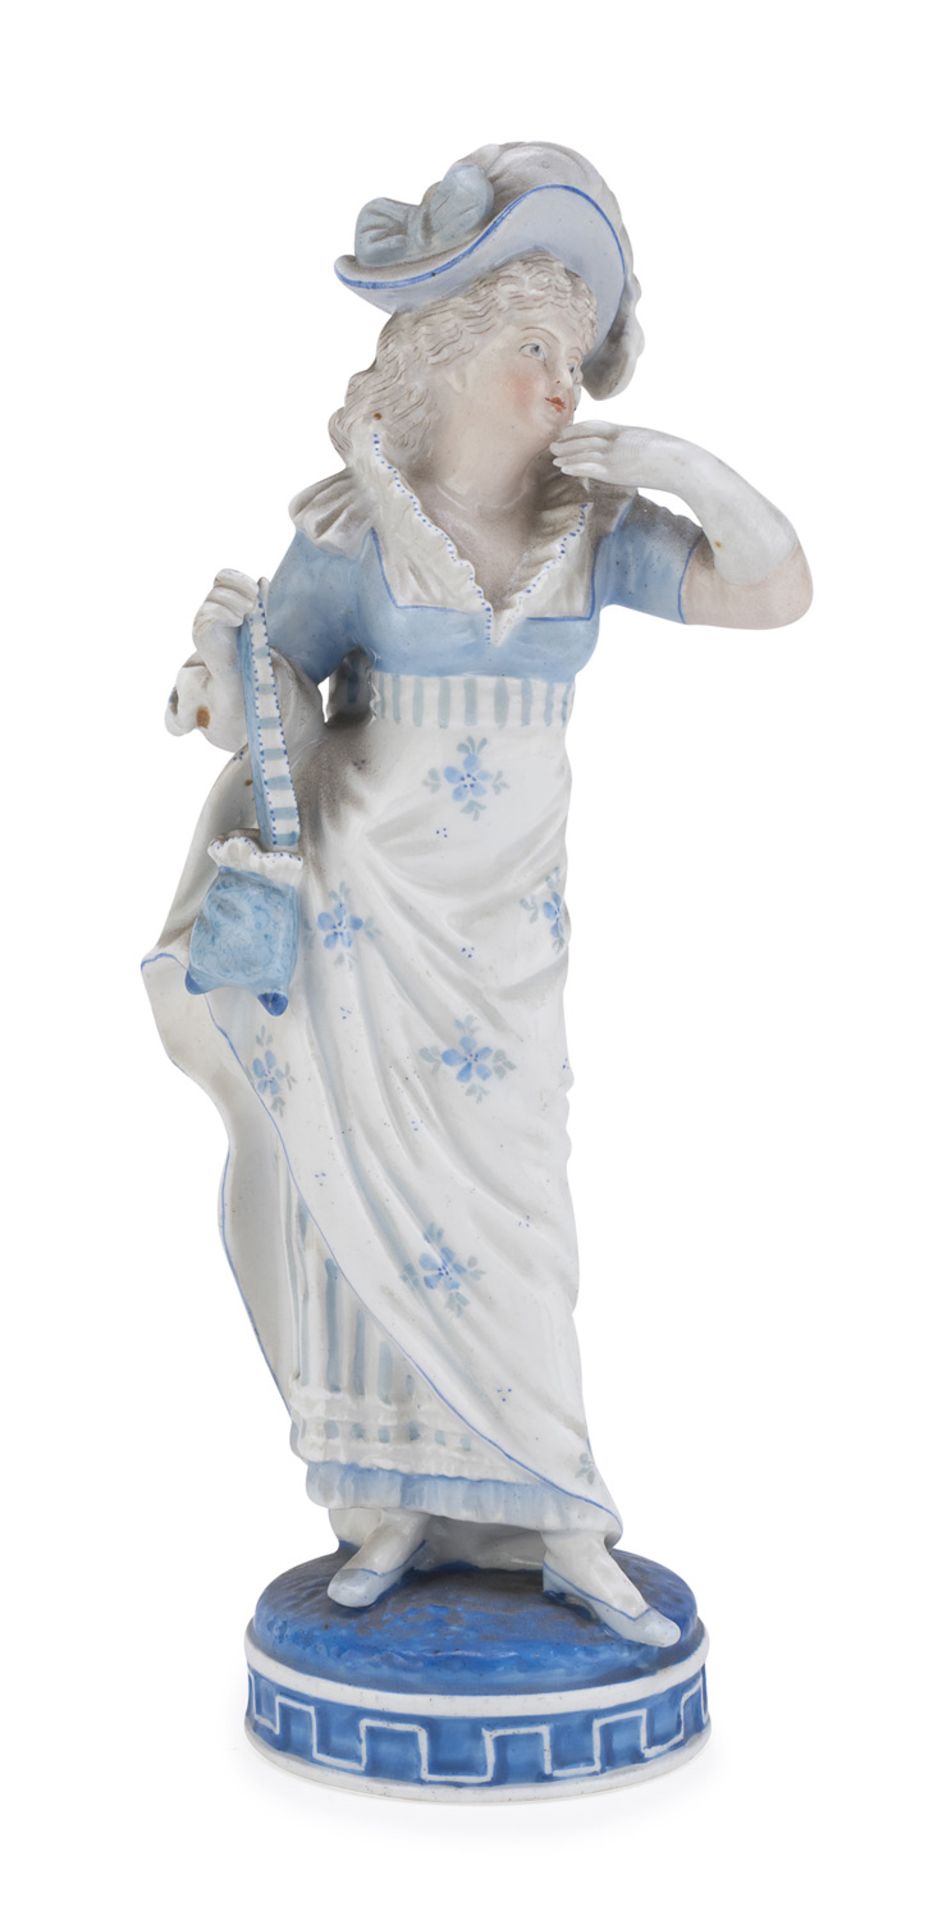 PORCELAIN SCULPTURE OF A WOMAN WITH UMBRELLA PROBABLY GERMANY LATE 19TH CENTURY